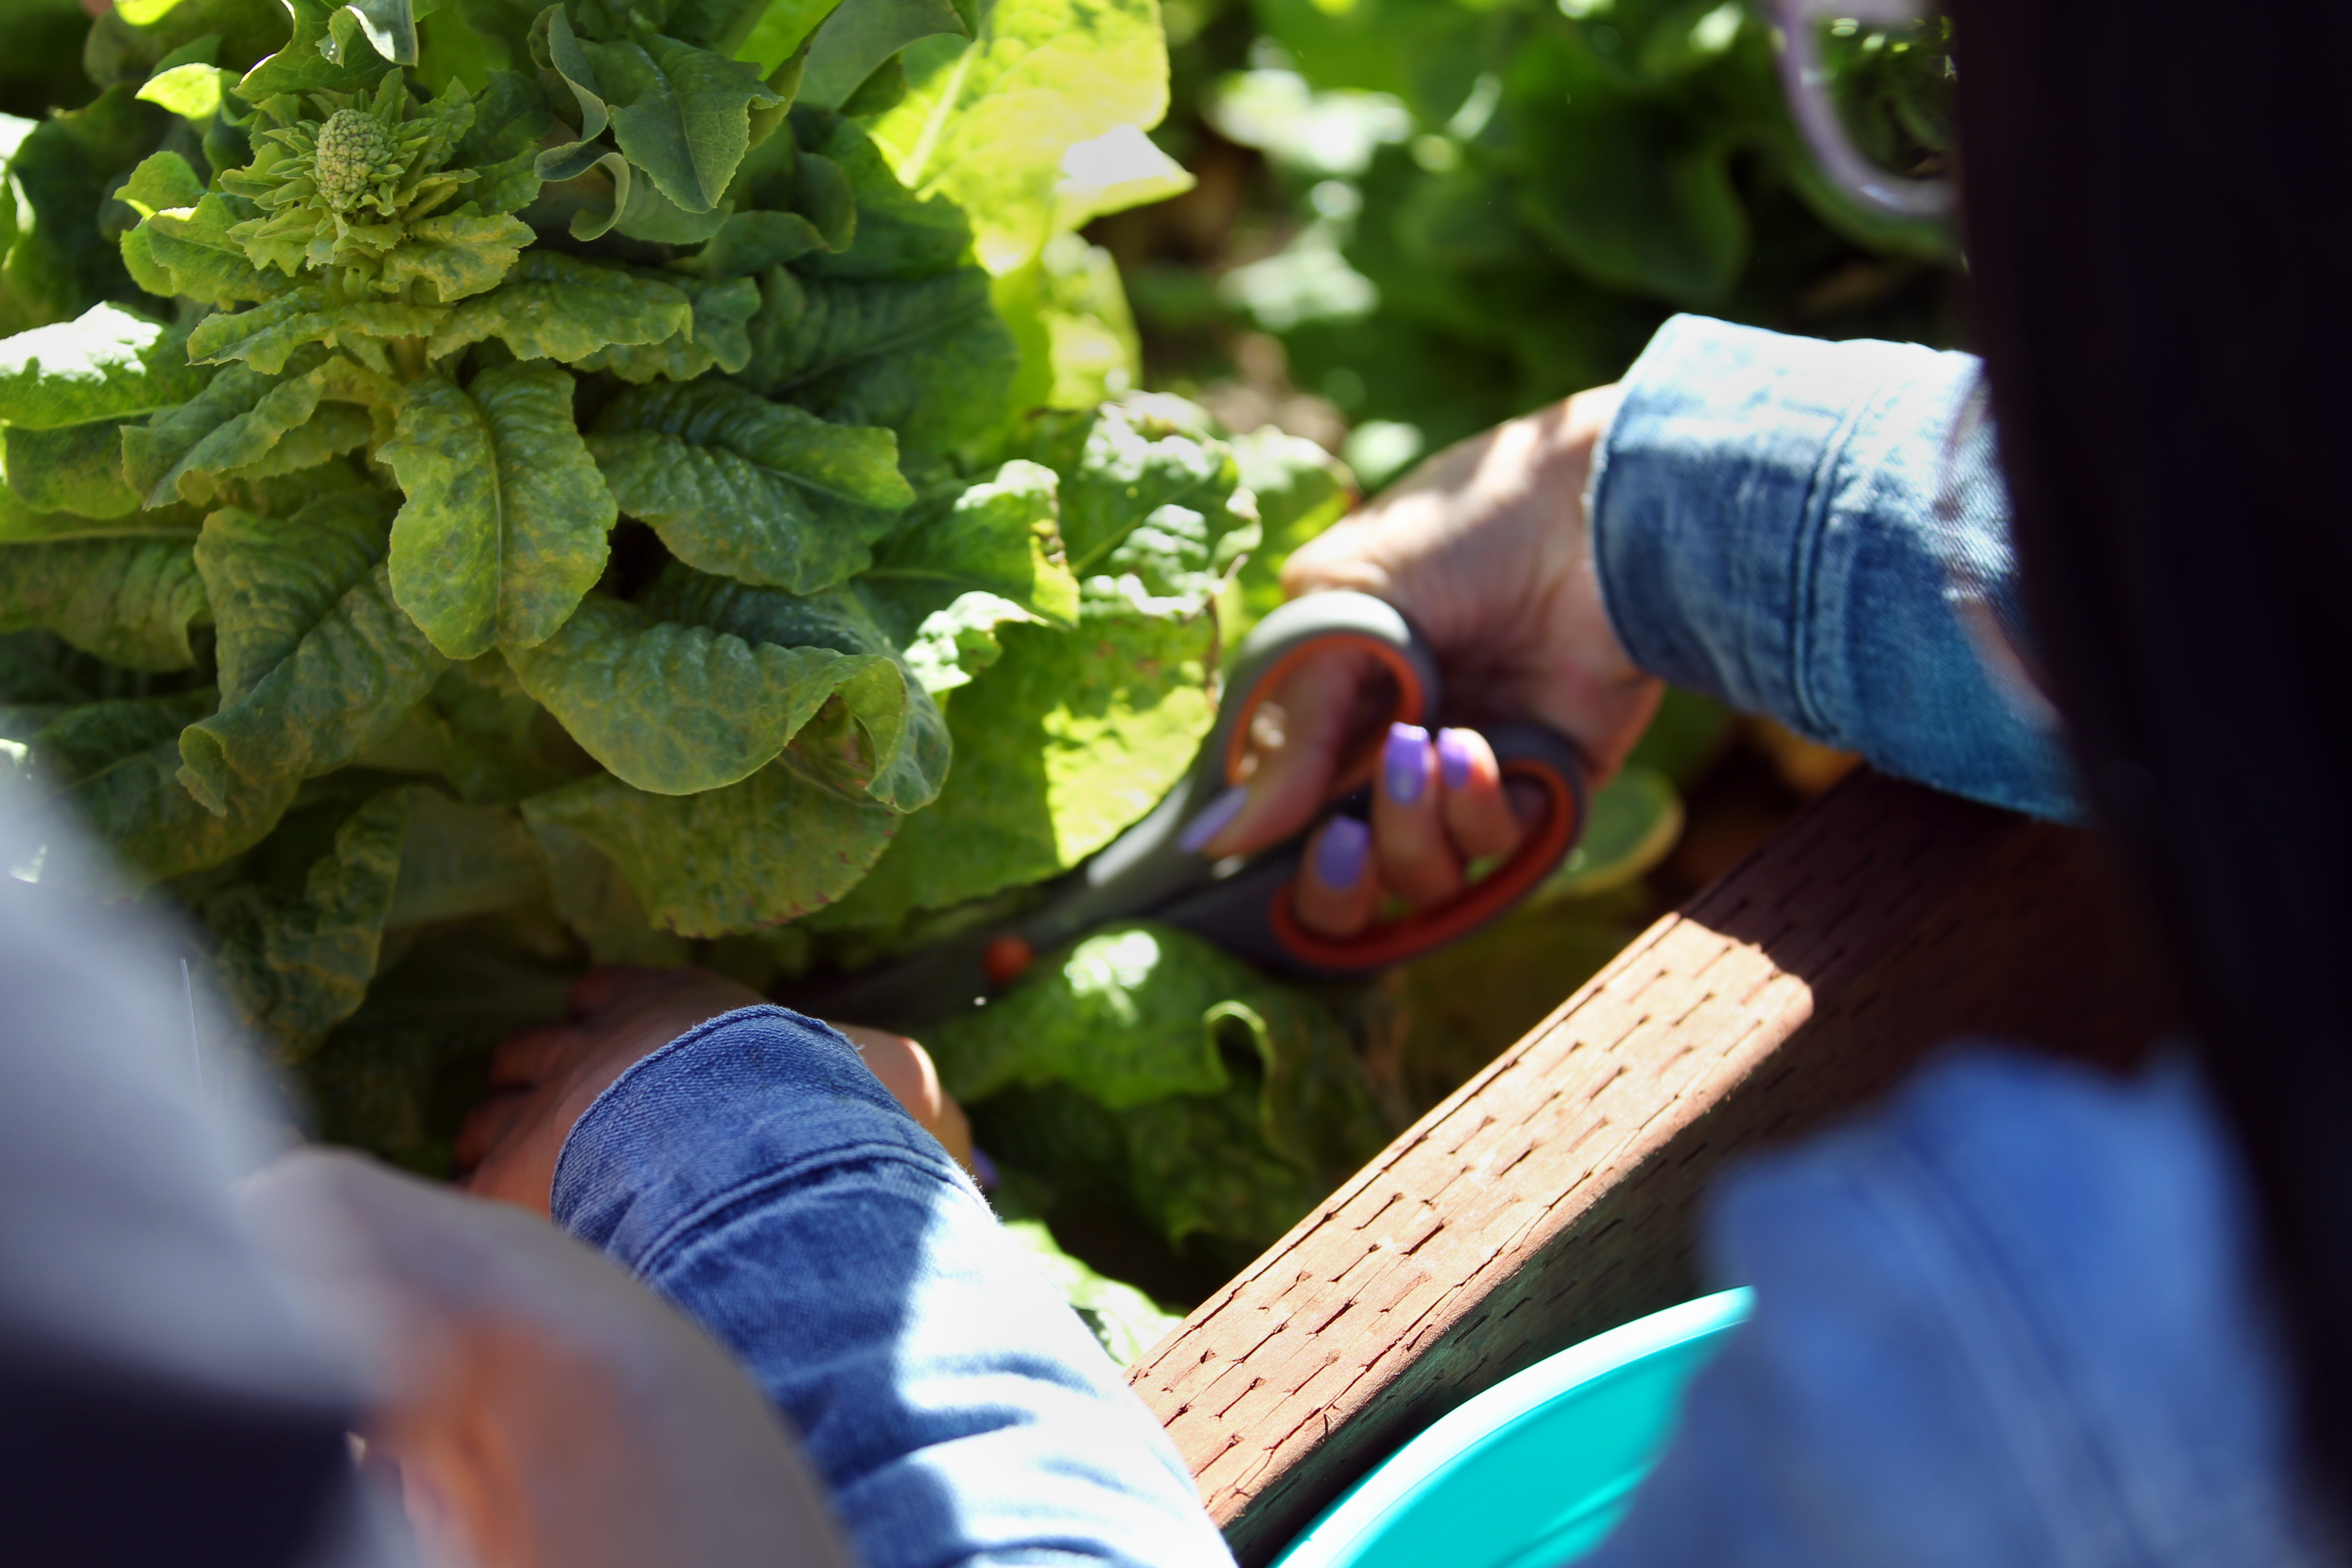 Students picked a crop of broccoli, buttercrunch lettuce and other vegetables from the garden, which is located in the university’s student housing area, next to the Serrano Village Quad.